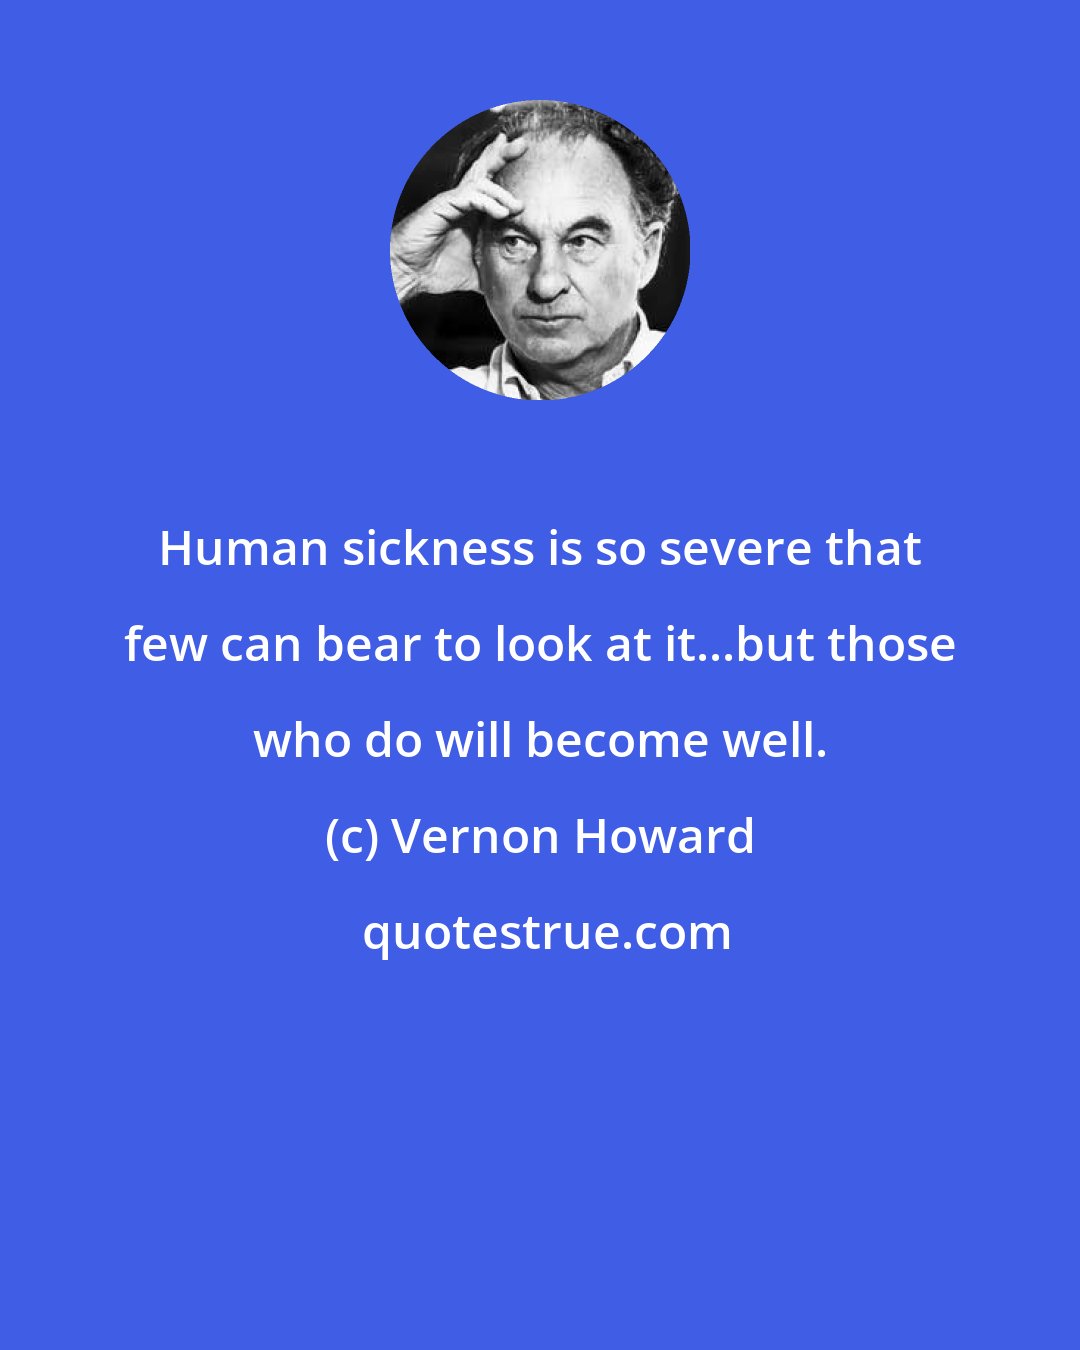 Vernon Howard: Human sickness is so severe that few can bear to look at it...but those who do will become well.